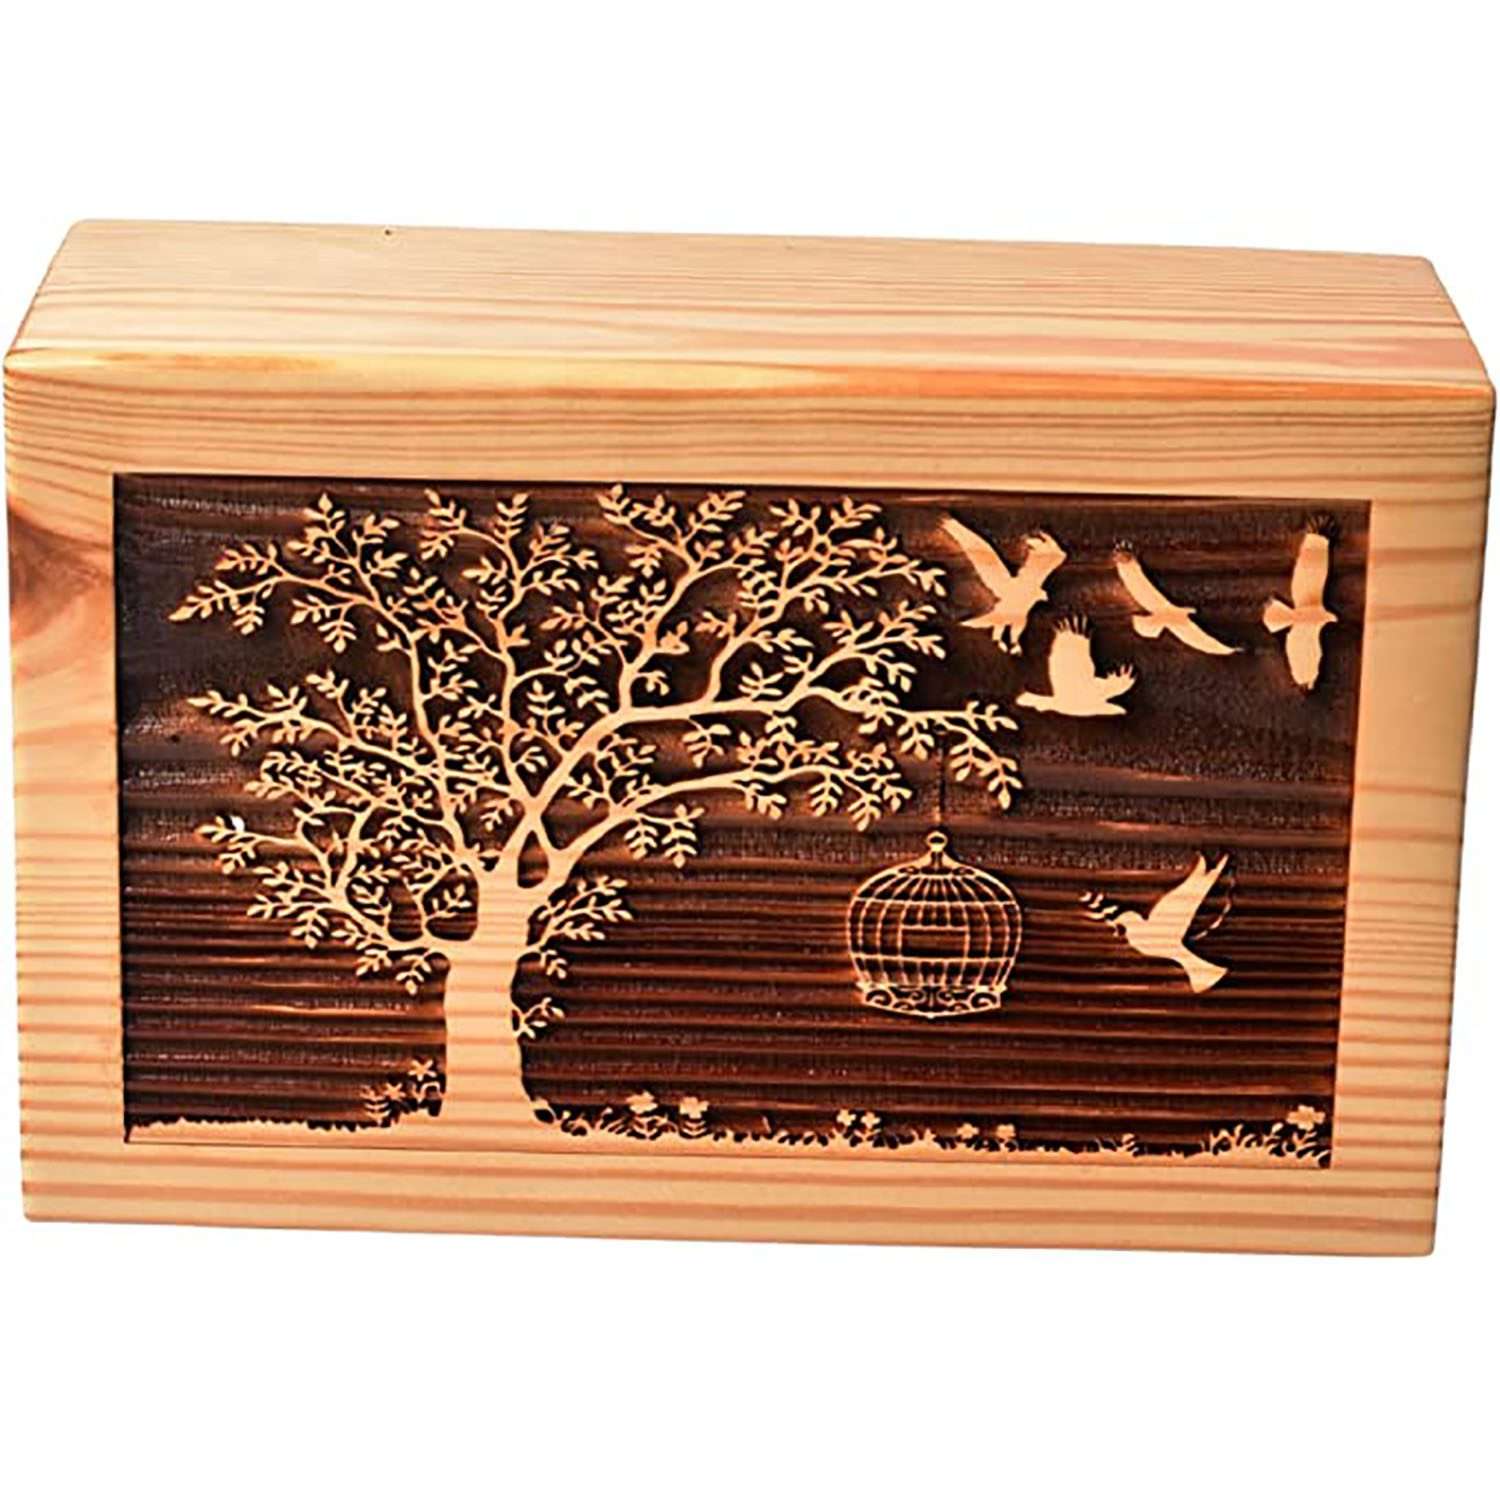 Hand carved Urn Wooden Box | Premium Wooden Box for Human ashes with beautiful design | Wood Urn Box manufacturer & supplier